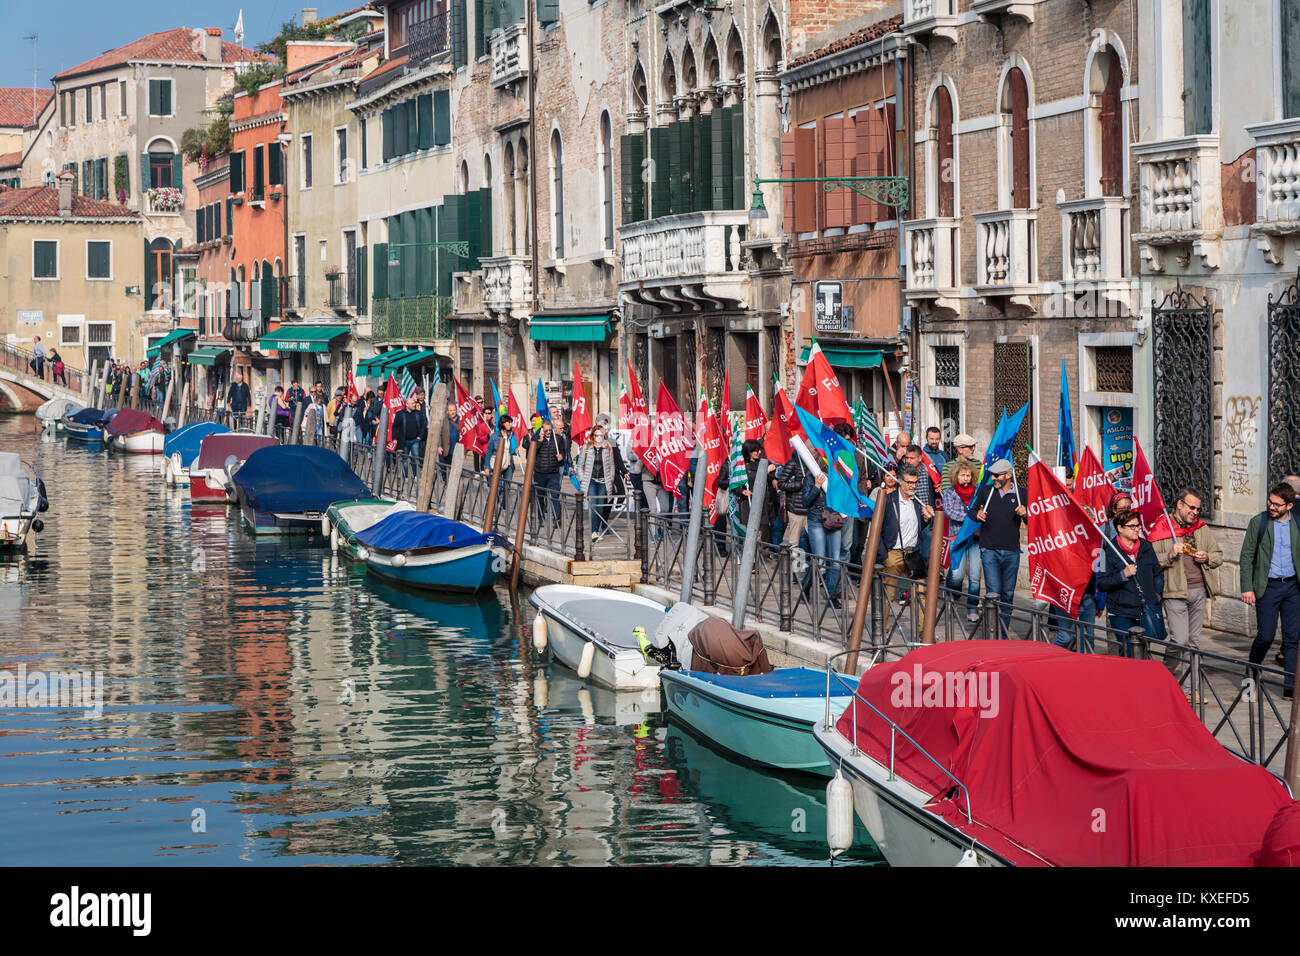 A public demonstration along the Grand Canal in Veneto, Venice, Italy, Europe, Stock Photo